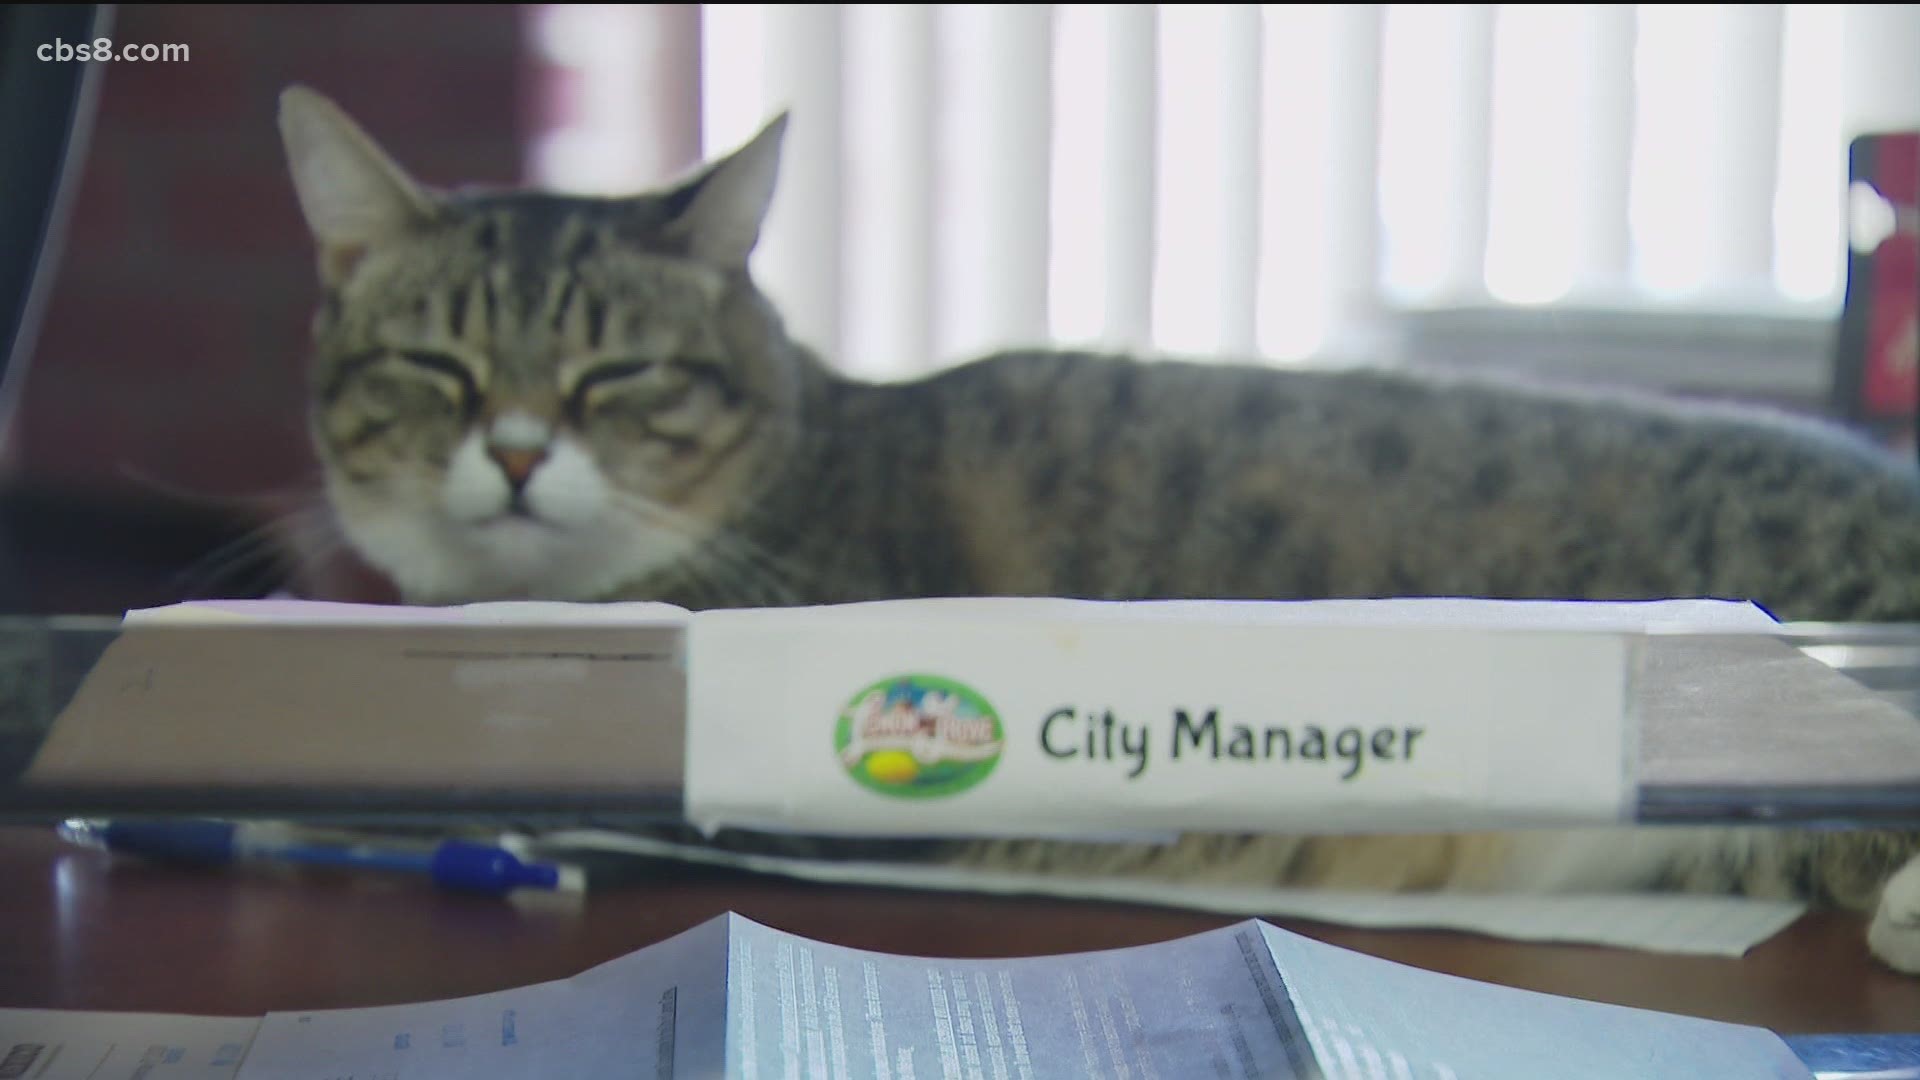 Princess Tyga, a colorful tabby seems more than happy with her role as Lemon Grove city hall’s official emotional support cat.